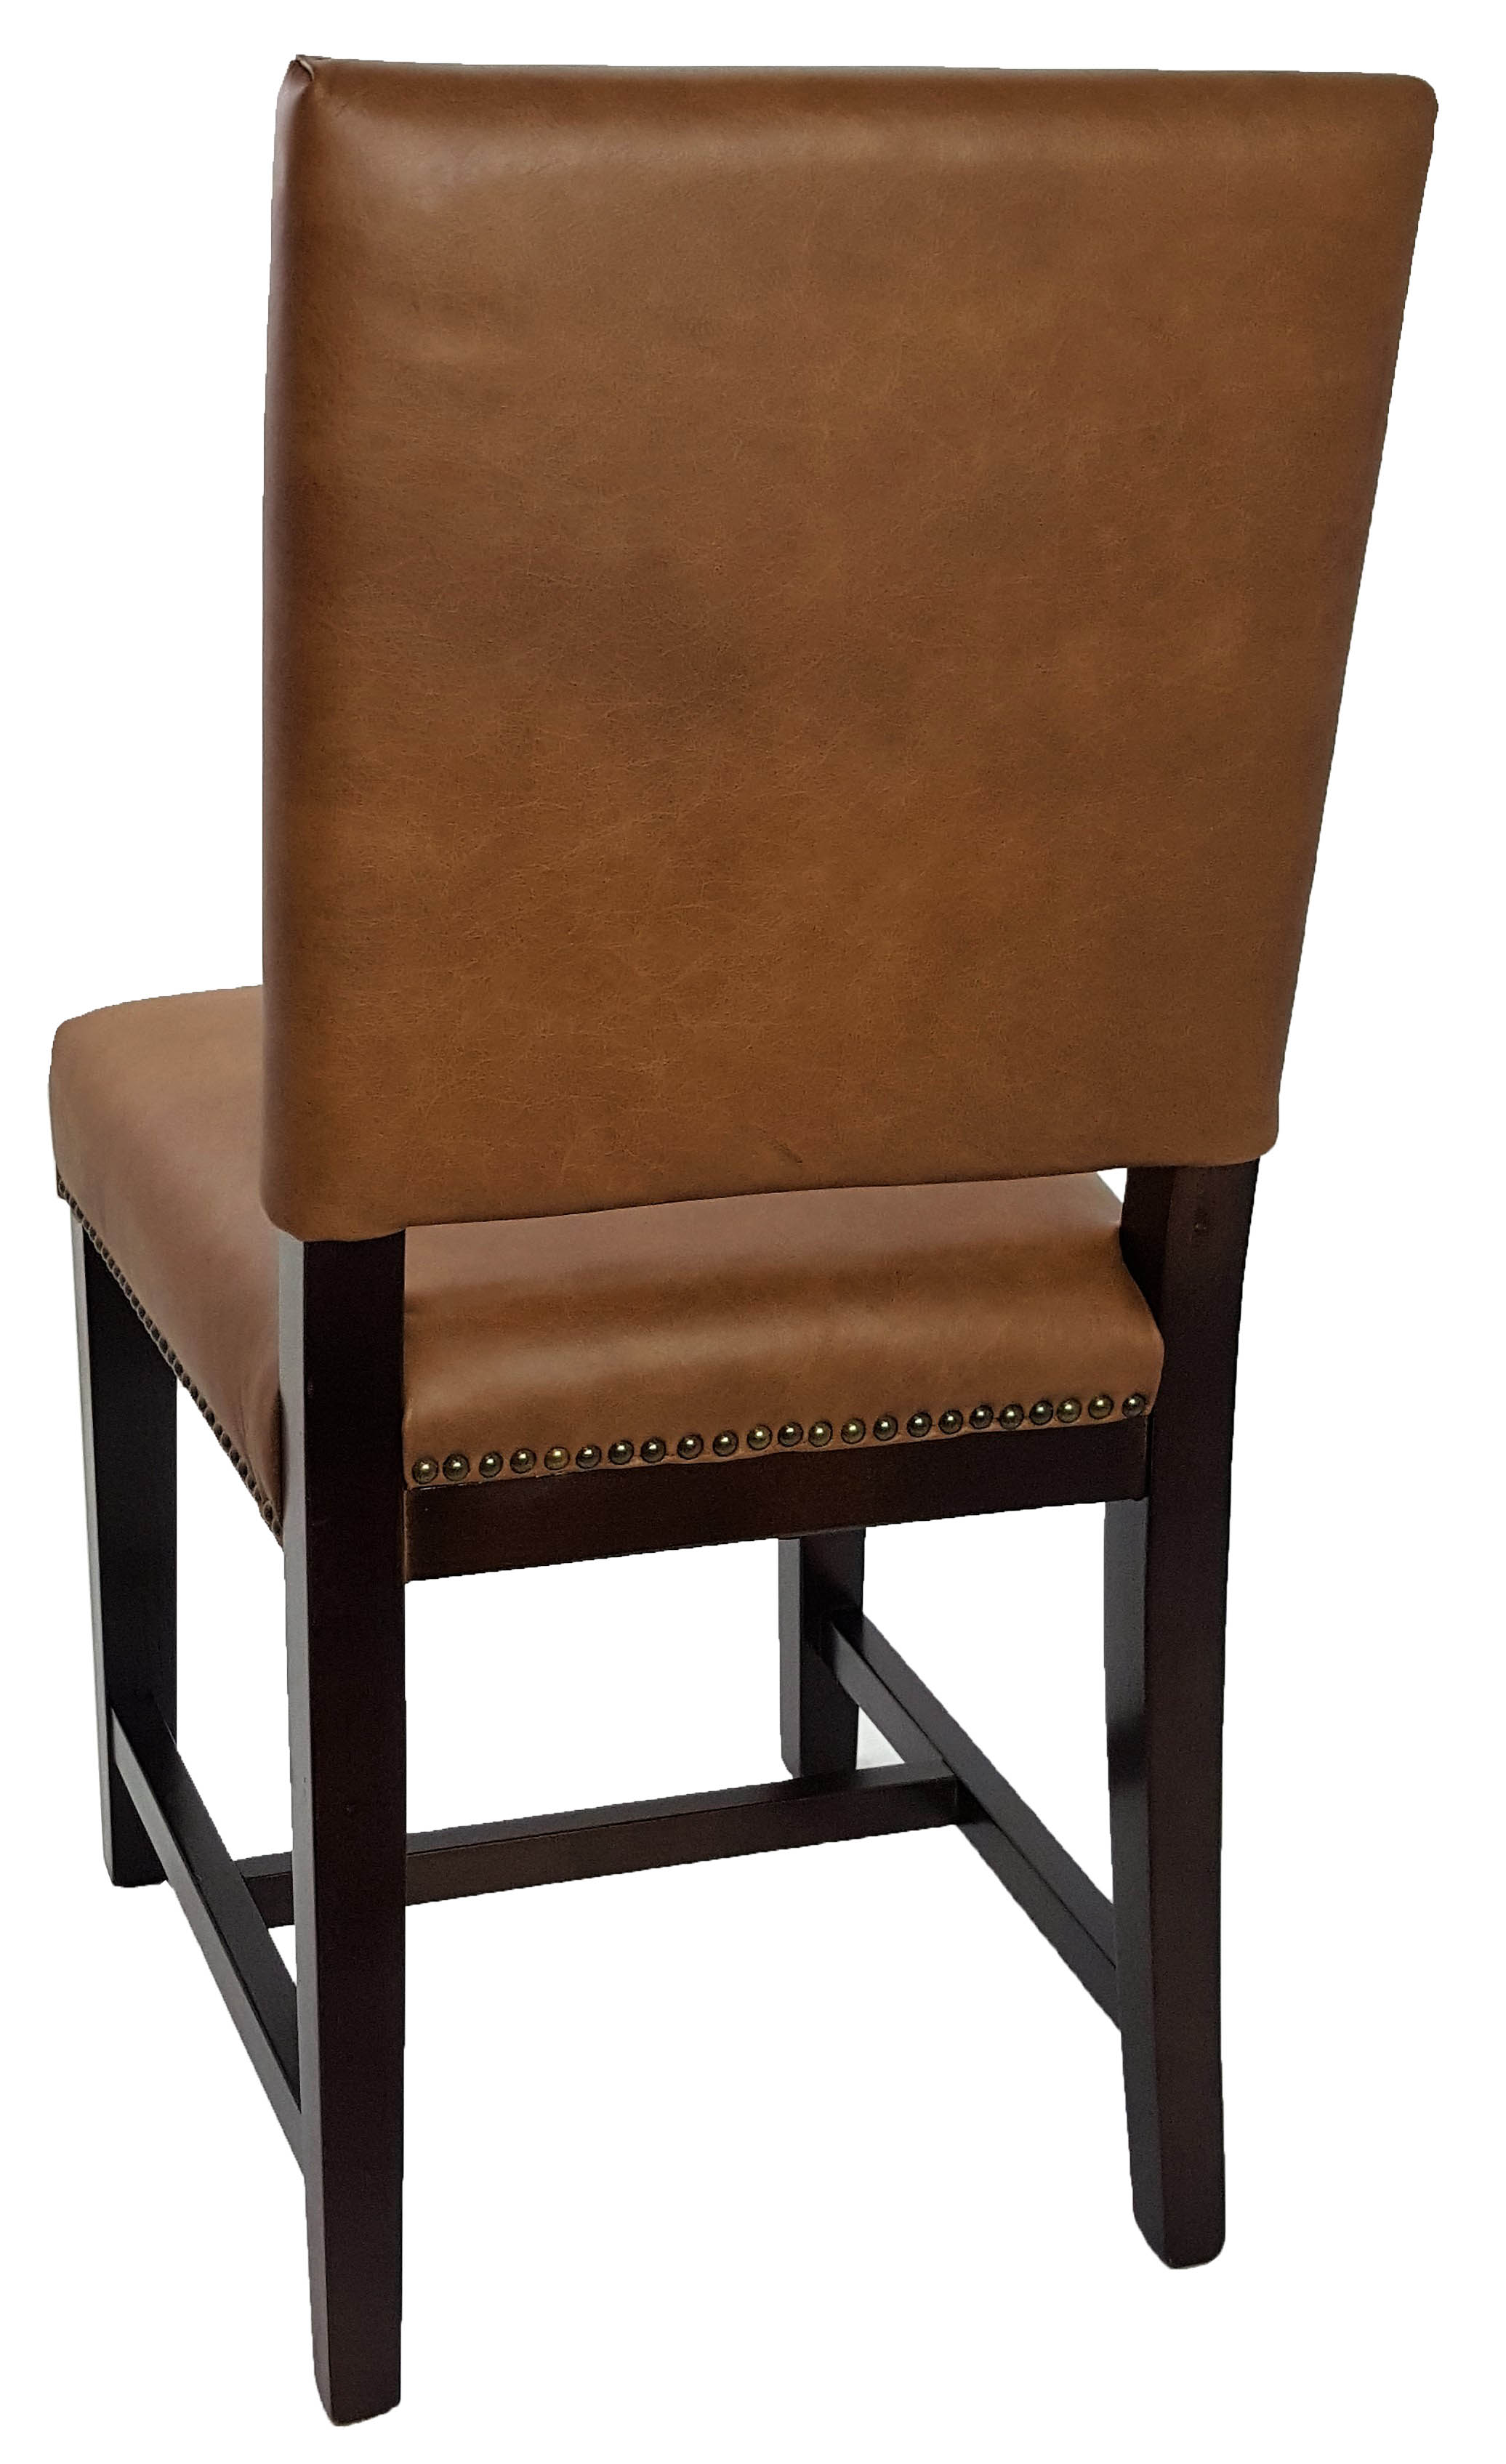 leather kitchen chair r db antique brown dinning chair new